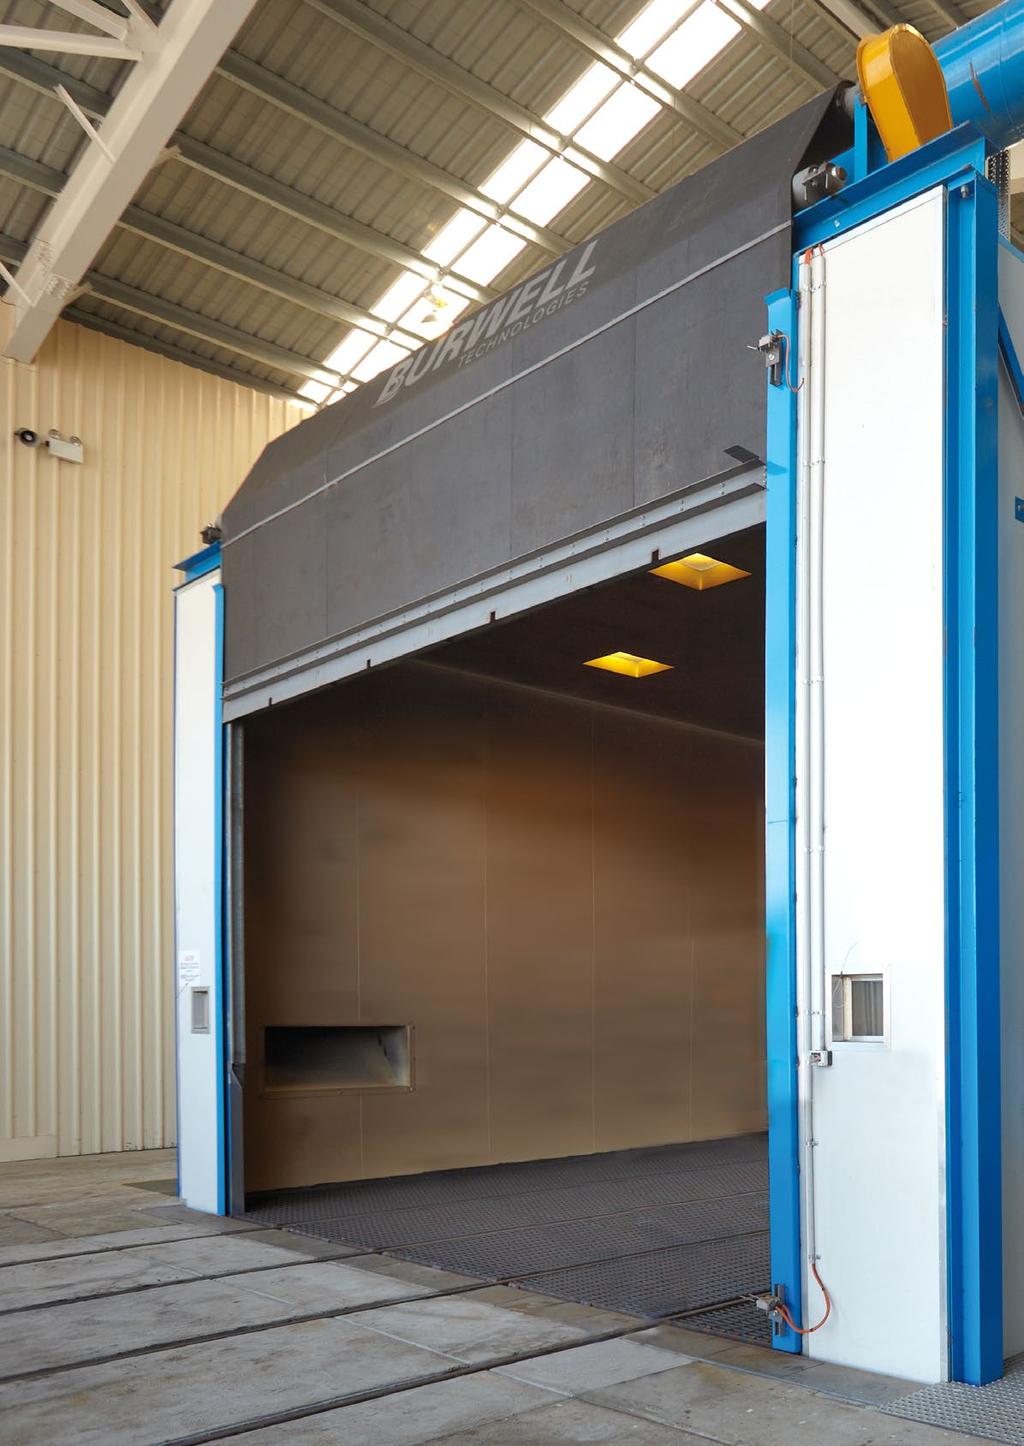 BURWELL CUTTING-EDGE BLAST ROOMS As Australia s leading manufacturer and distributor of equipment for the Surface Preparation Industry, our goal is to help improve your productivity and reduce